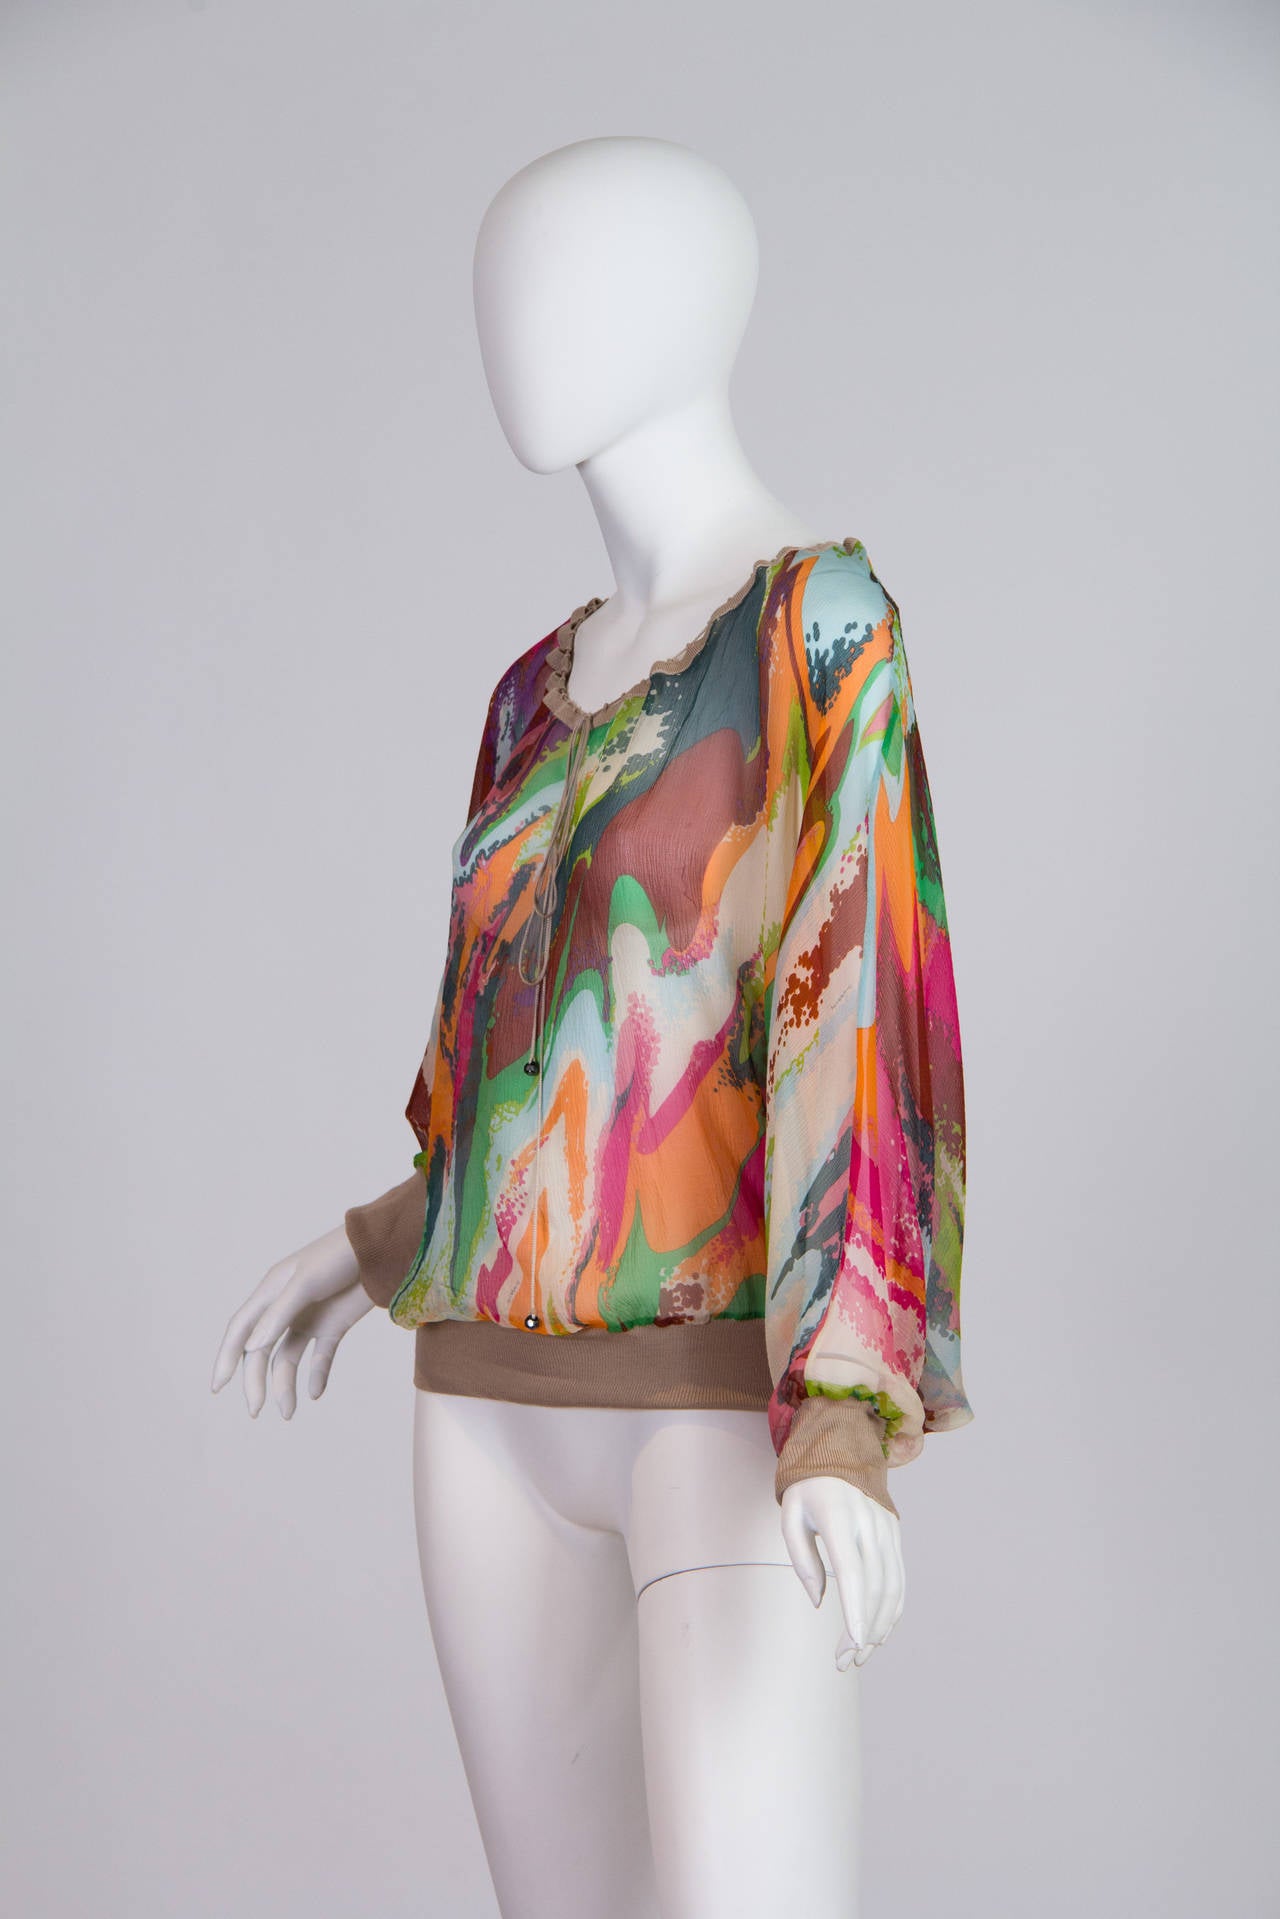 This is a bright and cheerful chiffon blouse by design house Missoni. Most well known for their complex knit designs, Missoni has diverged into a wider range of mediums with this blouse while still retaining their iconic patterns and colours, as